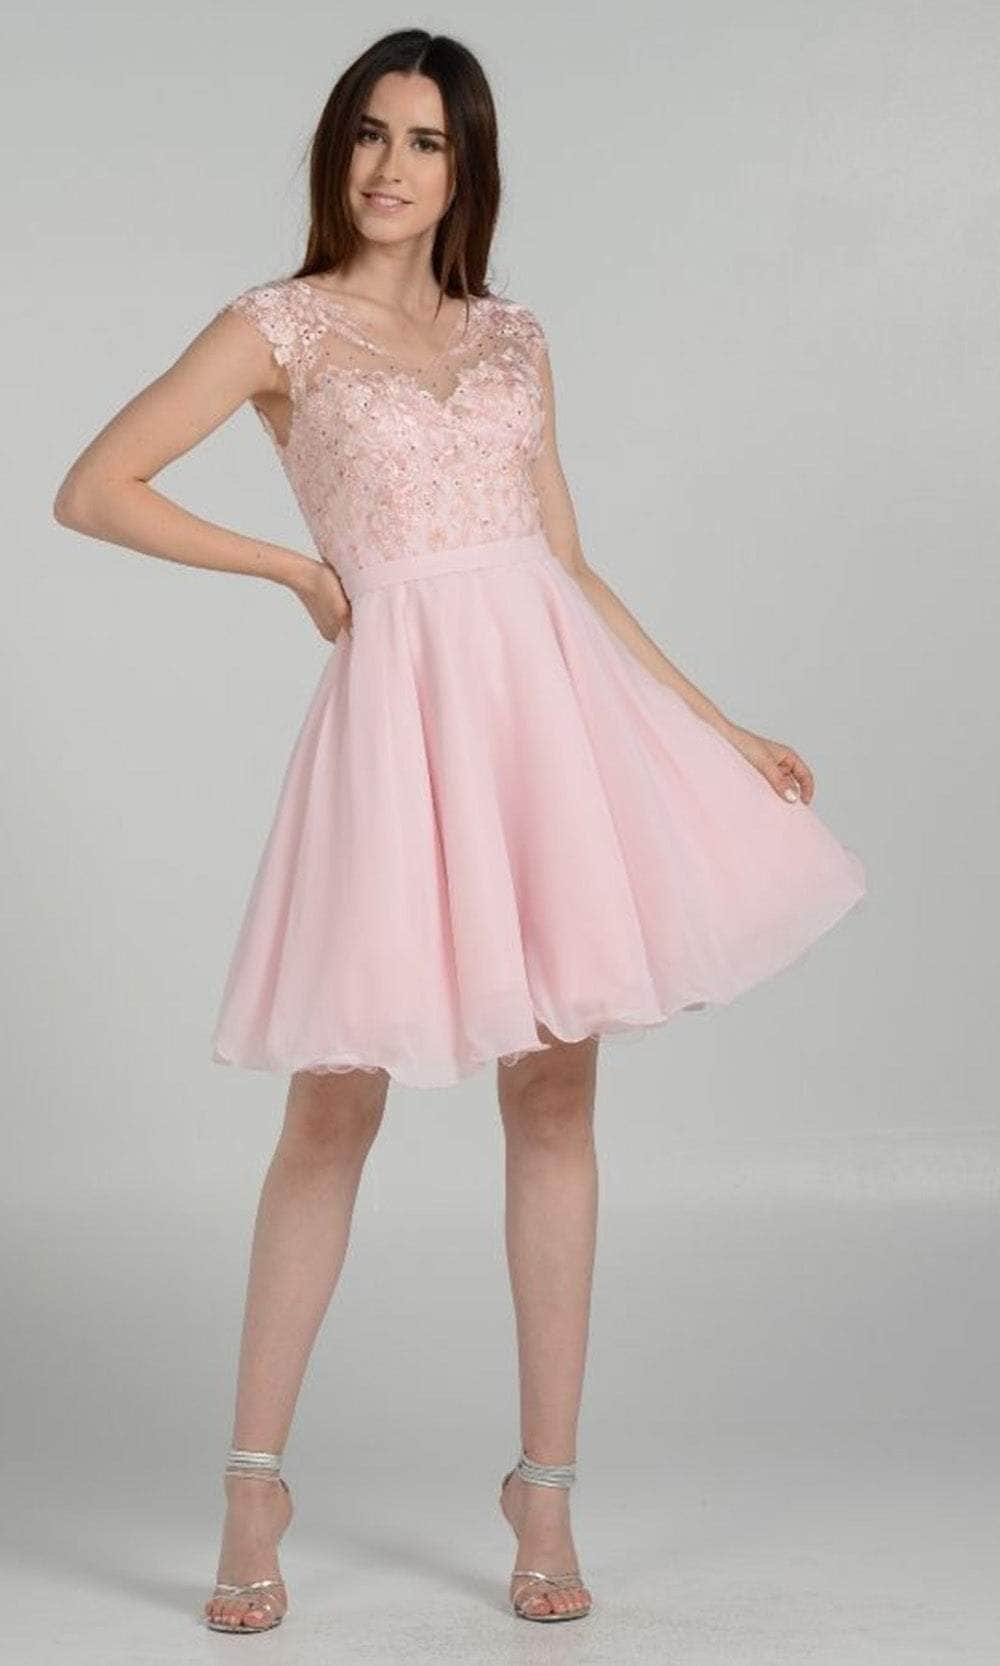 Poly USA 8094 - Scoop Neck Short Sleeve Cocktail Dress Prom Dresses XS / Blush